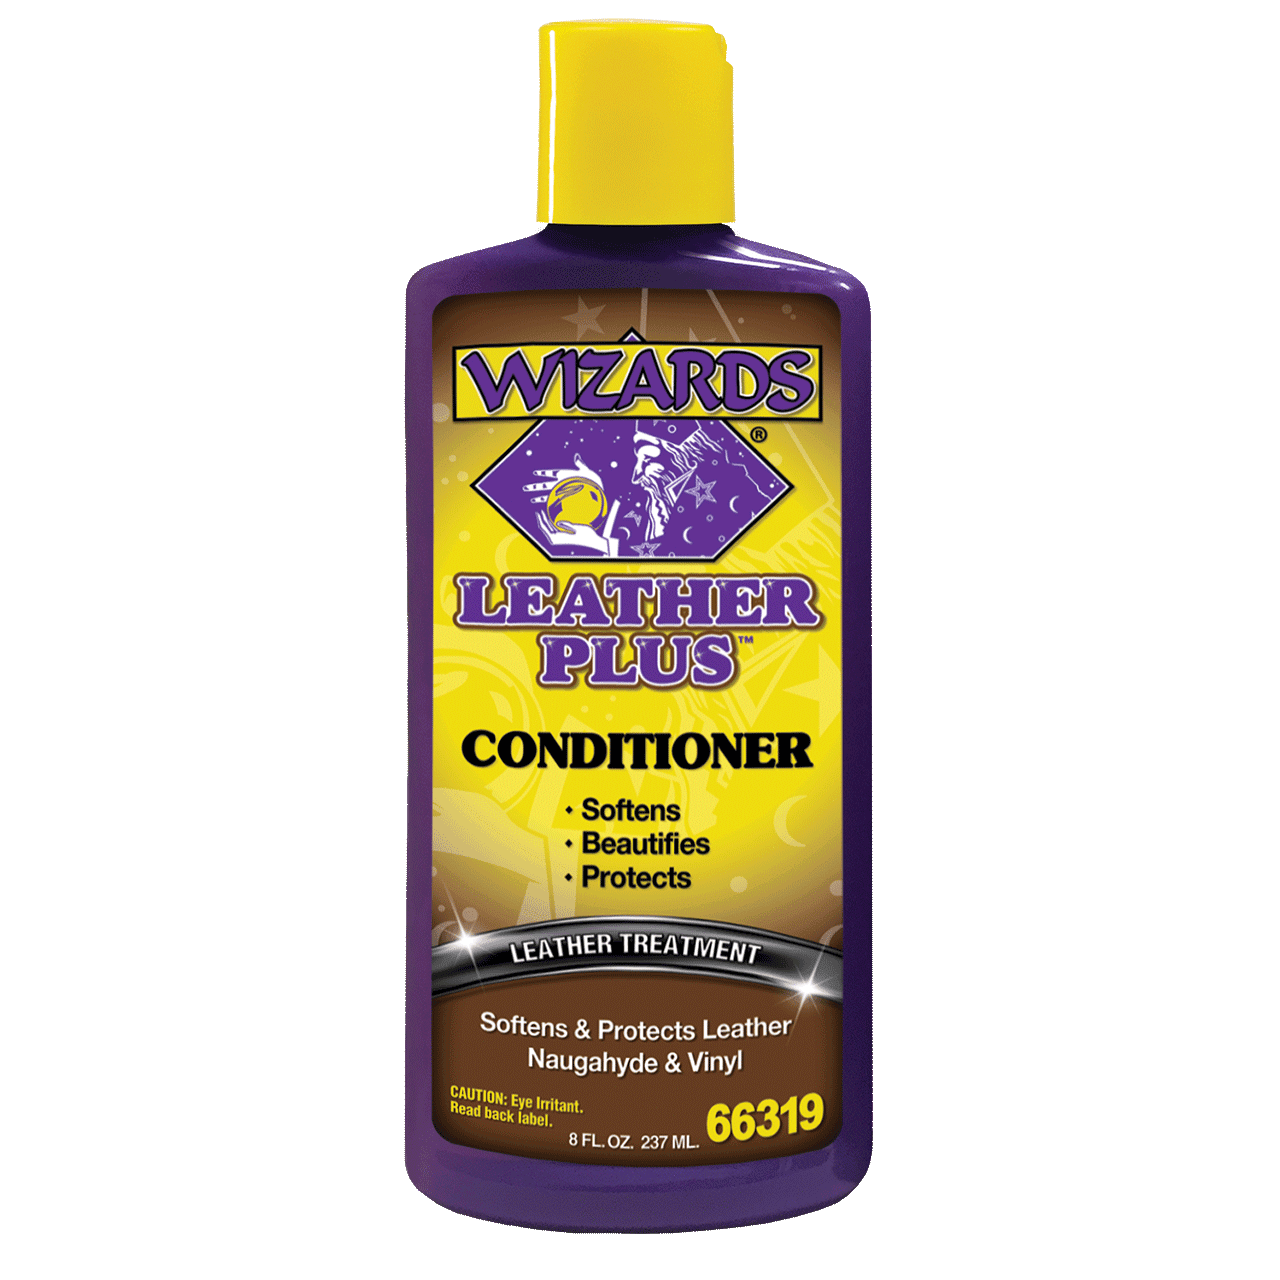 Armor All Leather Care Cleaner, Conditioner And Protectant - 16 FL OZ 